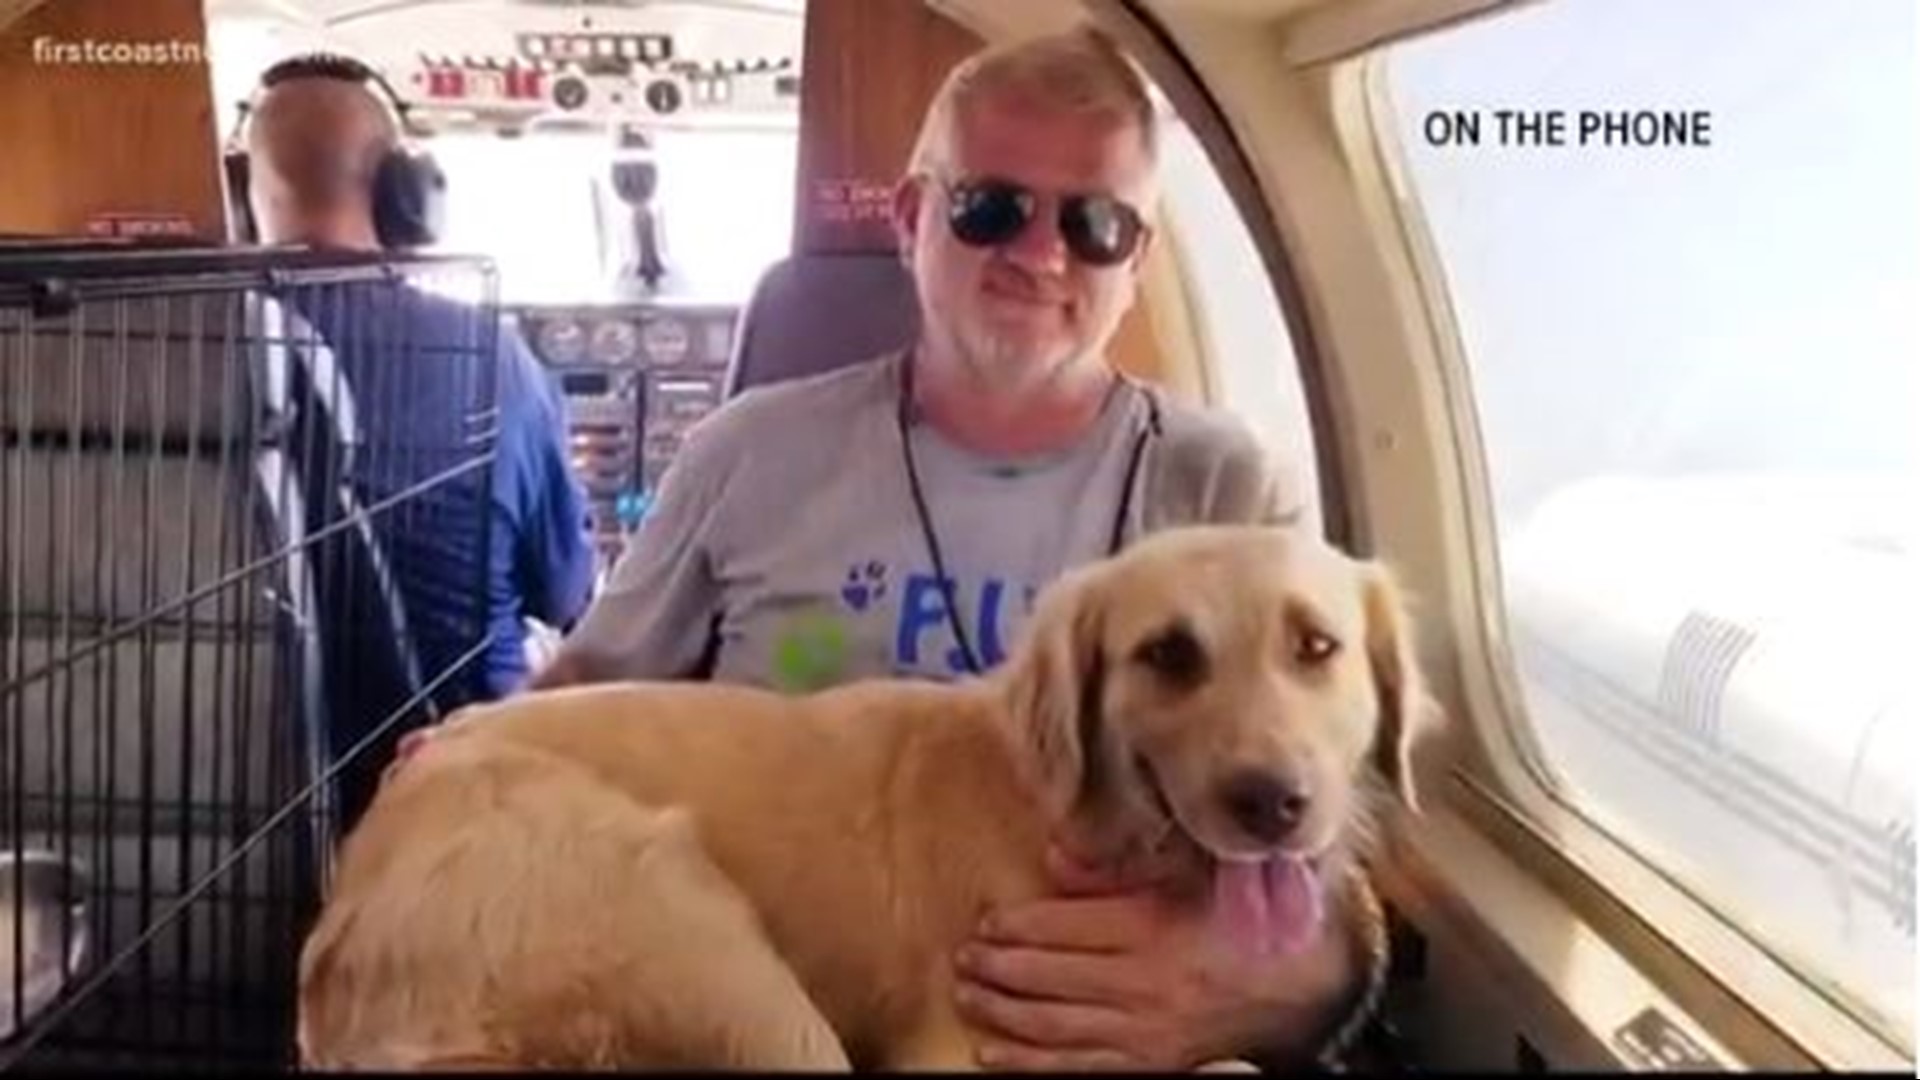 Florida Urgent Rescue has been working diligently to rescue animals left behind in the Bahamas from when Hurricane Dorian ravaged the islands.